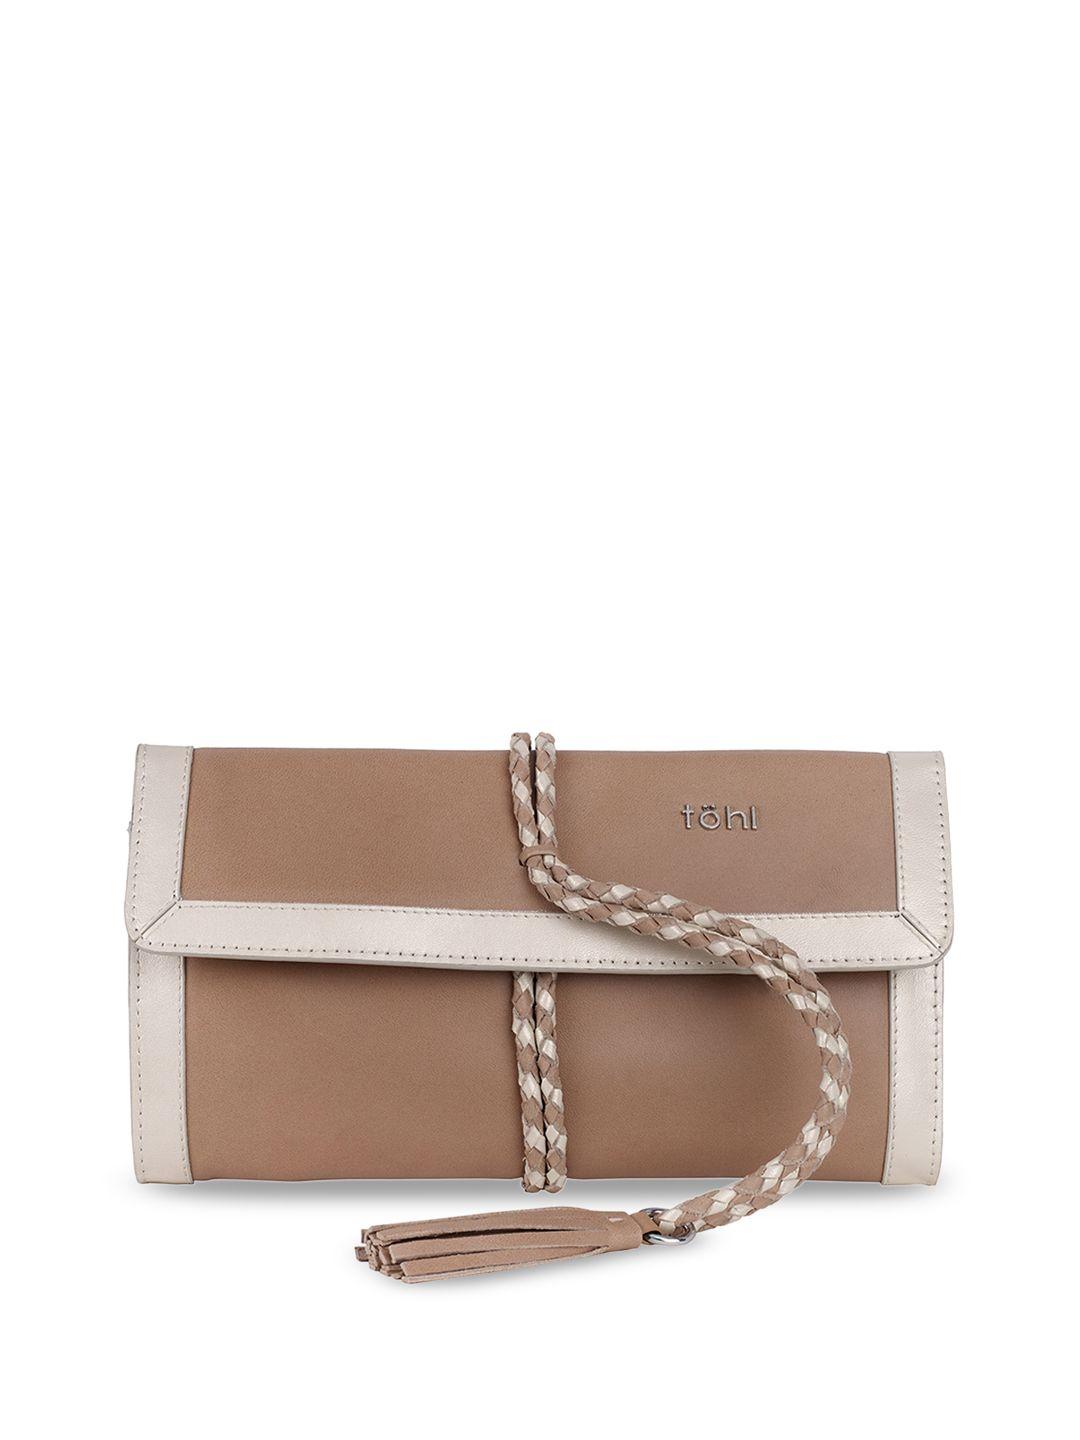 tohl brown solid clutch